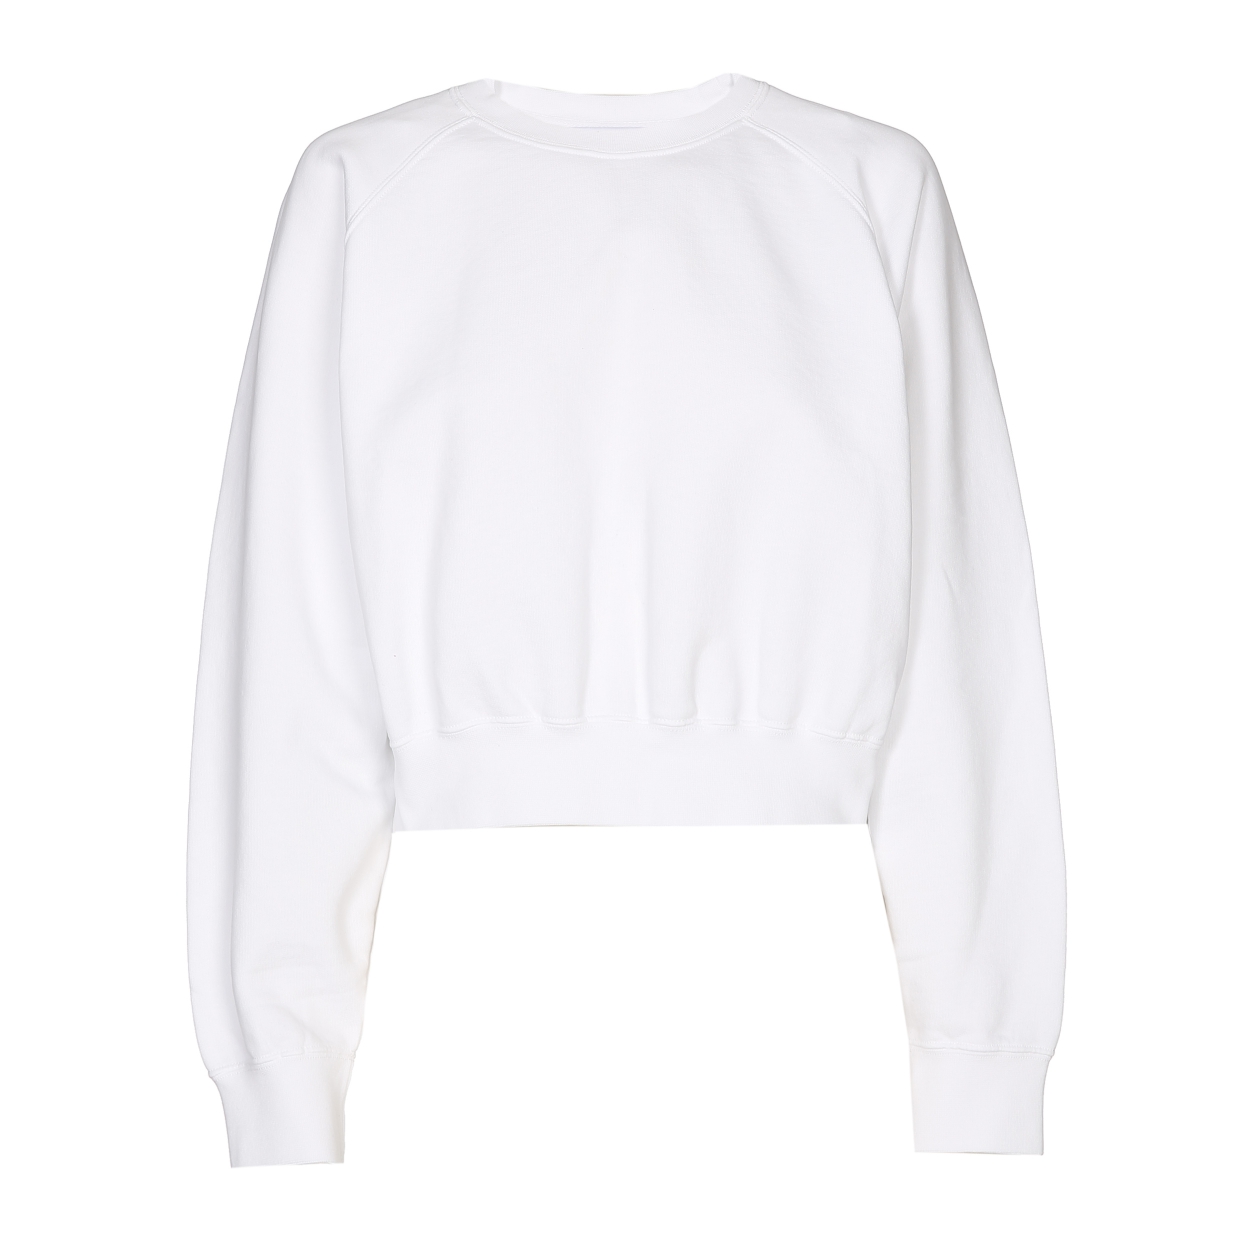 https://www.seamehappy.be/wp-content/uploads/2023/01/Sea-Me-Happy-Mika-cropped-sweater-white-.jpg